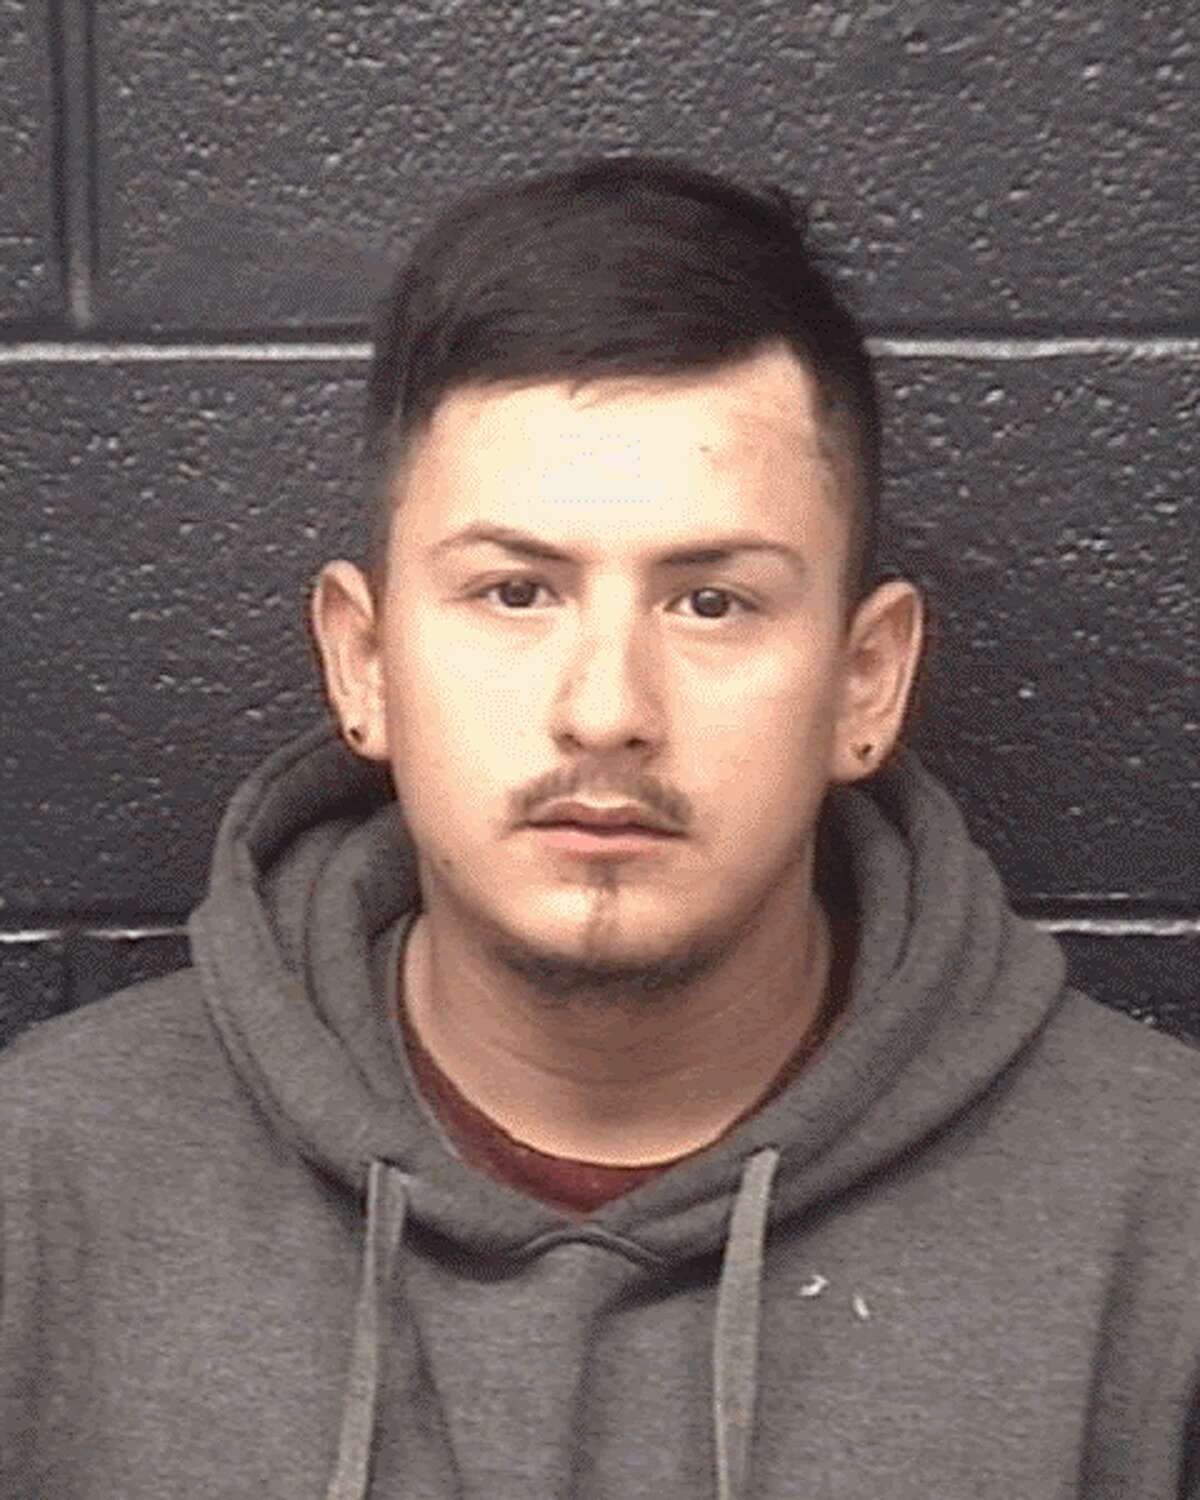 RODRIGUEZ, JOSE (W M) (21) years of age was arrested on the charge of ASSAULT CAUSES BODILY INJURY FAMILY VIOLENCE (M), at 1620 S TEXAS AVE, at 2342 hours on 1/16/2017